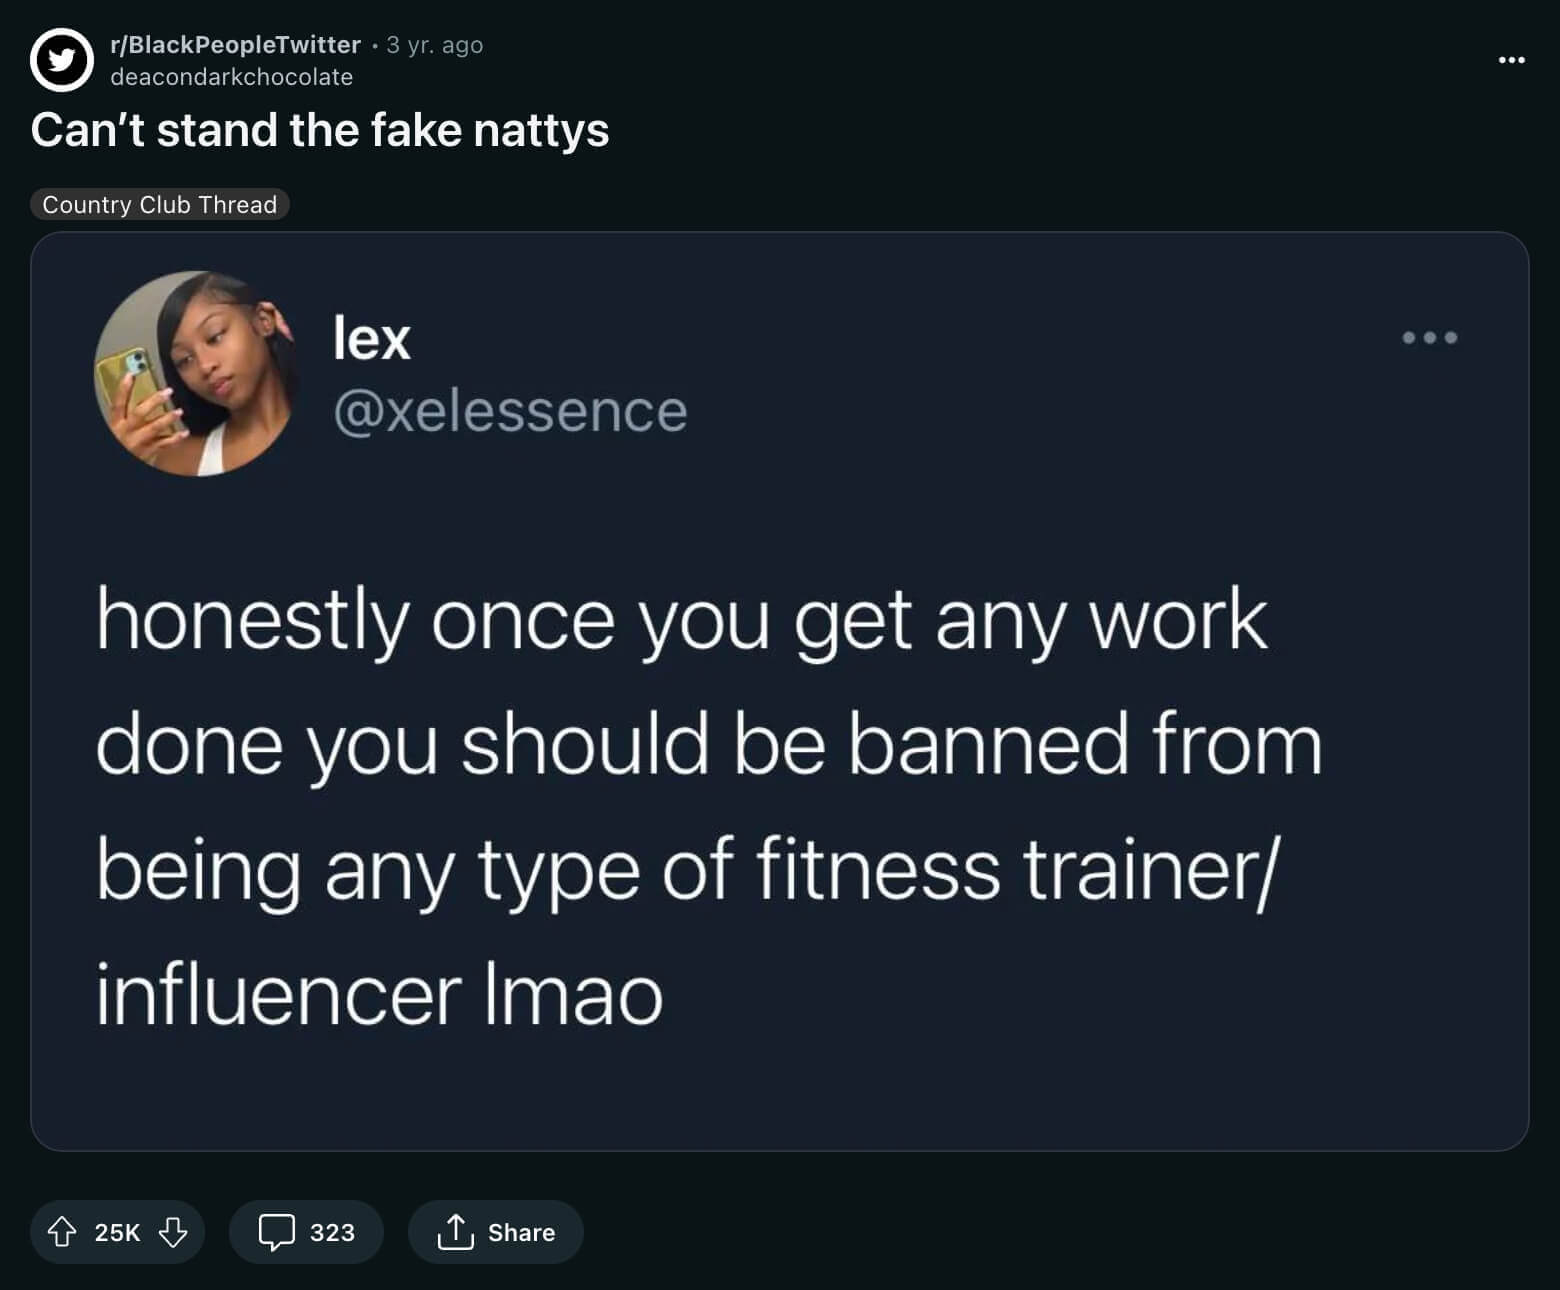 Redditor complaining about trainers and influencers that are fake natty